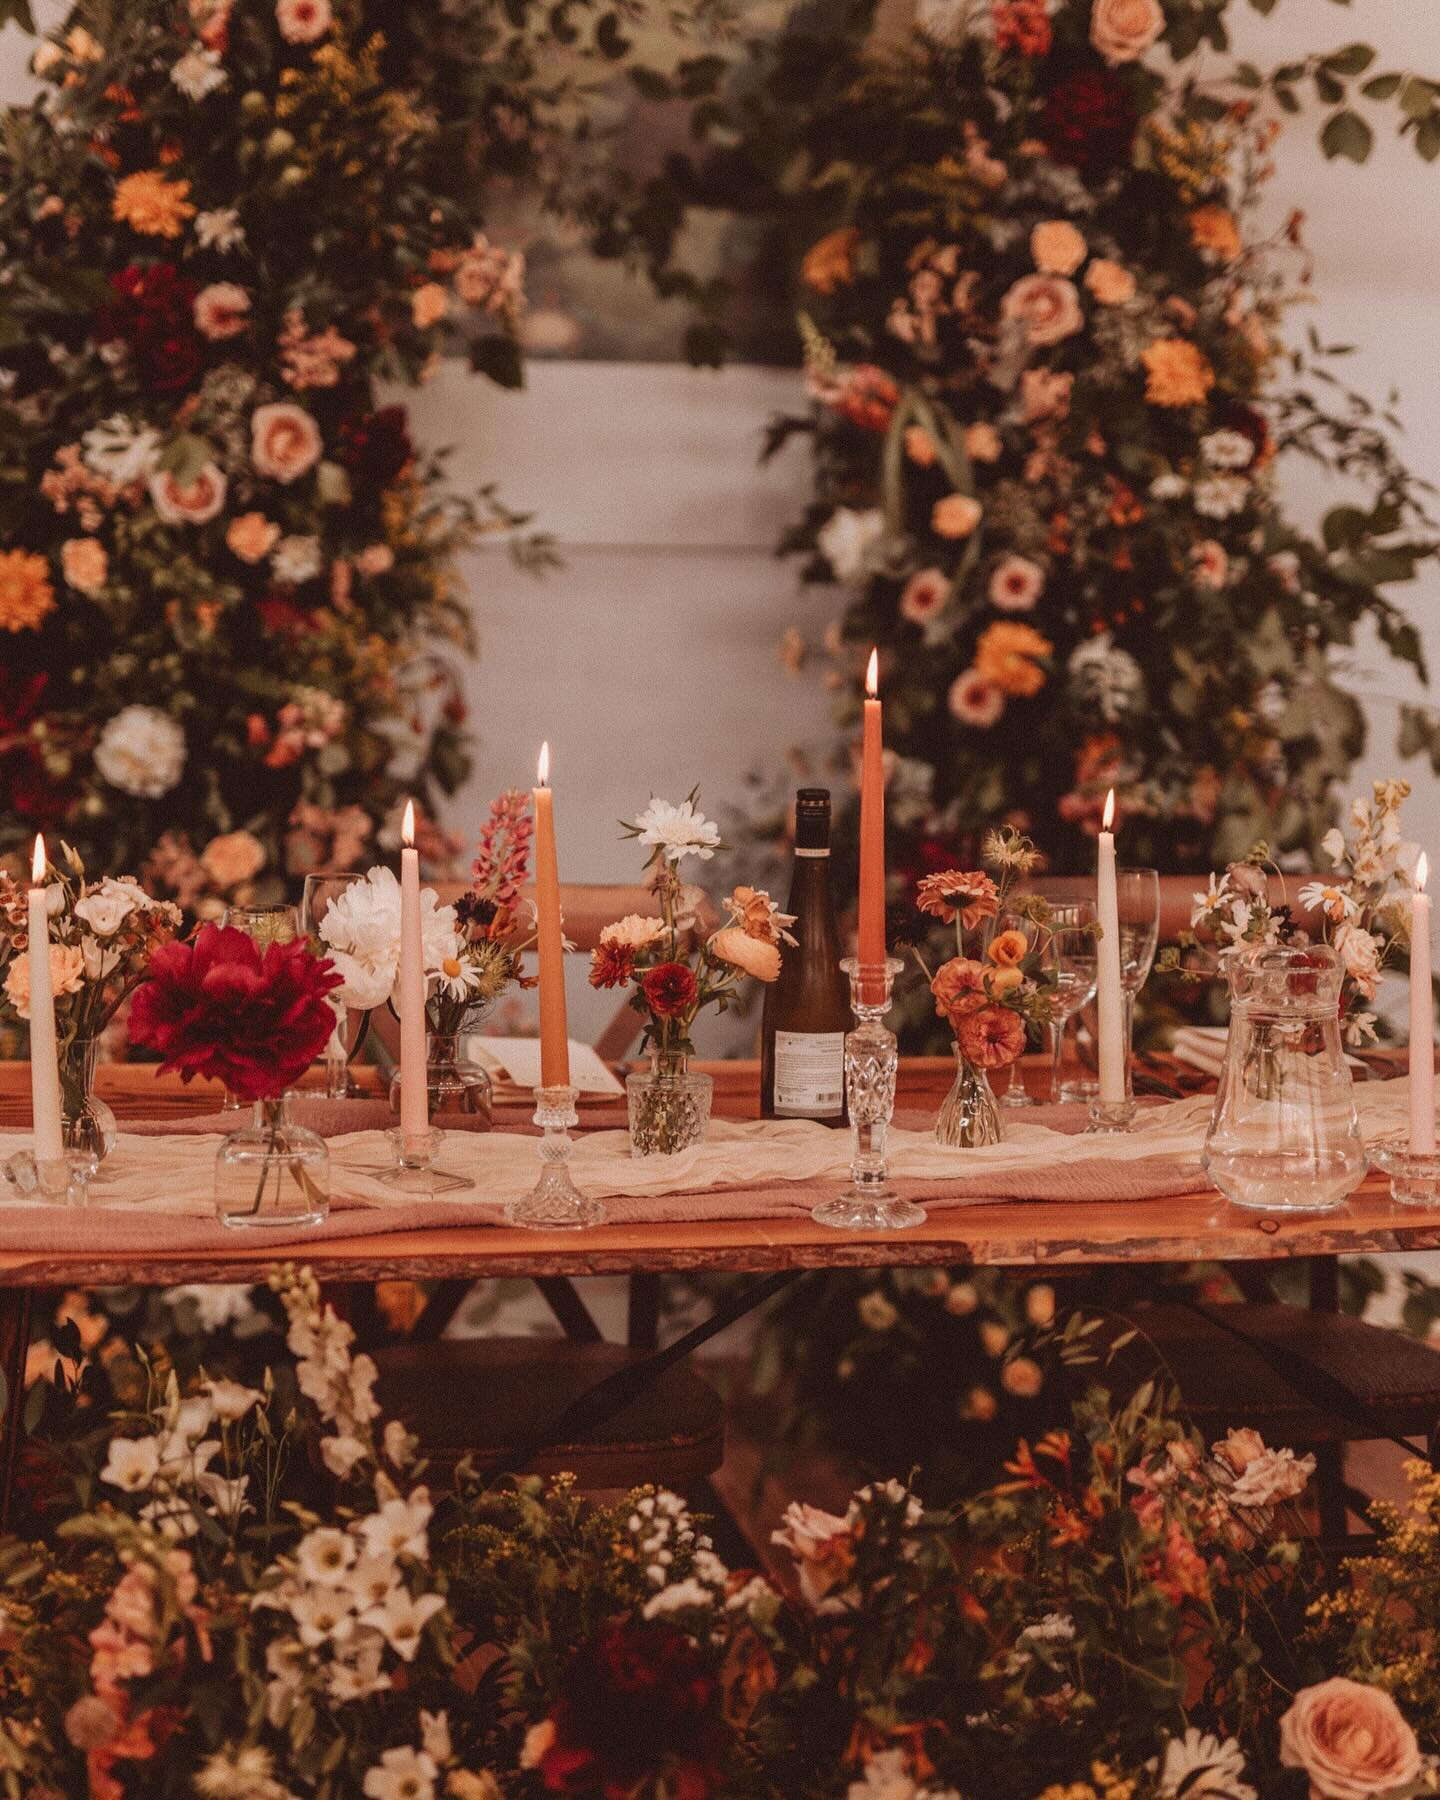 Autumn/winter will always have my heart but I&rsquo;m truly looking forward to spring/summer this year after looking back through mood boards and designs of what&rsquo;s coming up. 

My first spring tablescape of the year will be this weekend at @far